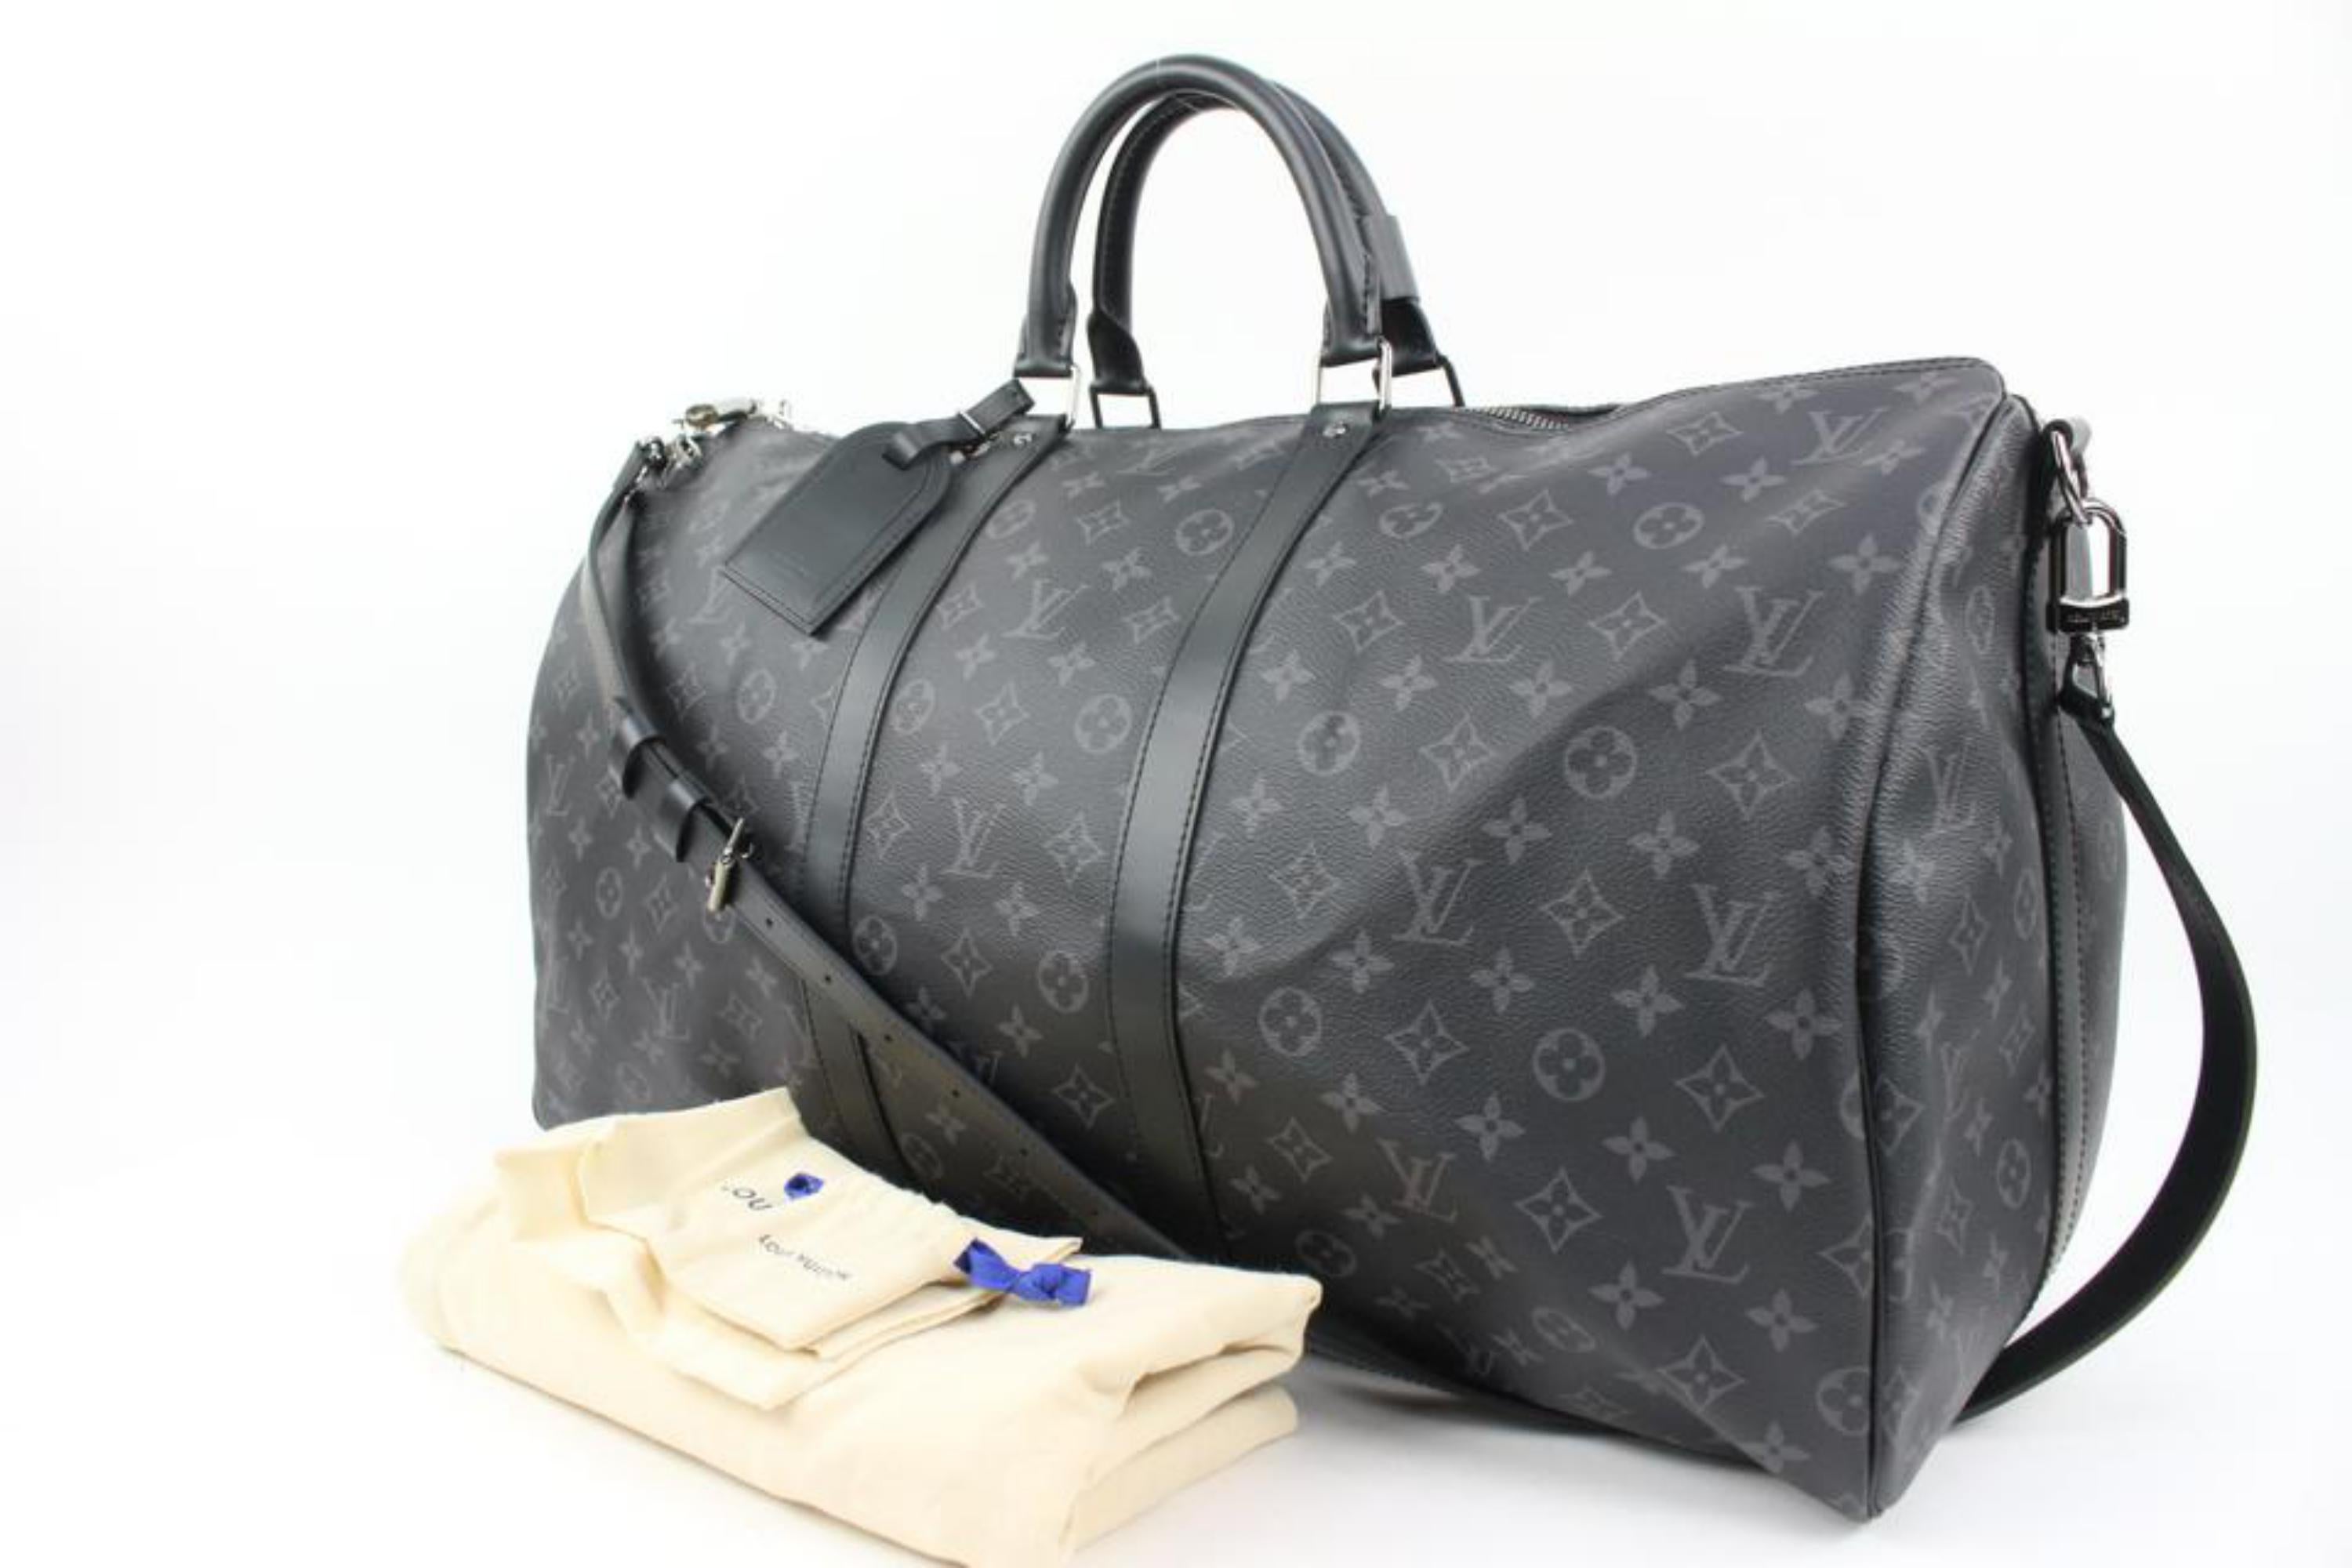 Louis Vuitton Black Monogram Eclipse Keepall Bandouliere 55 Duffle Bag Strap 39L0V
Date Code/Serial Number: DU2179
Made In: France
Measurements: Length:  22